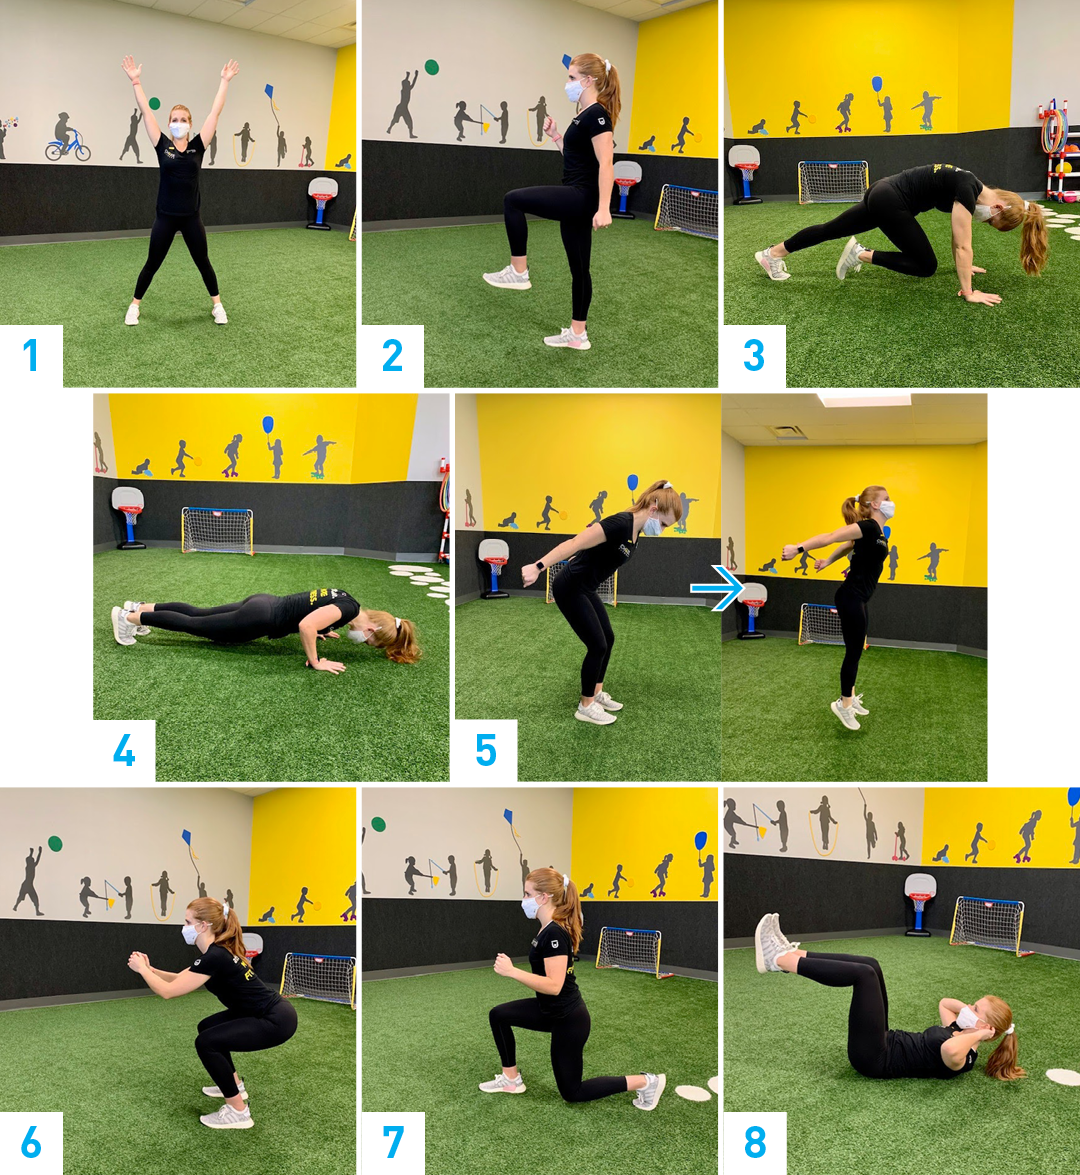 A collage of images showing examples of each numbered workout move